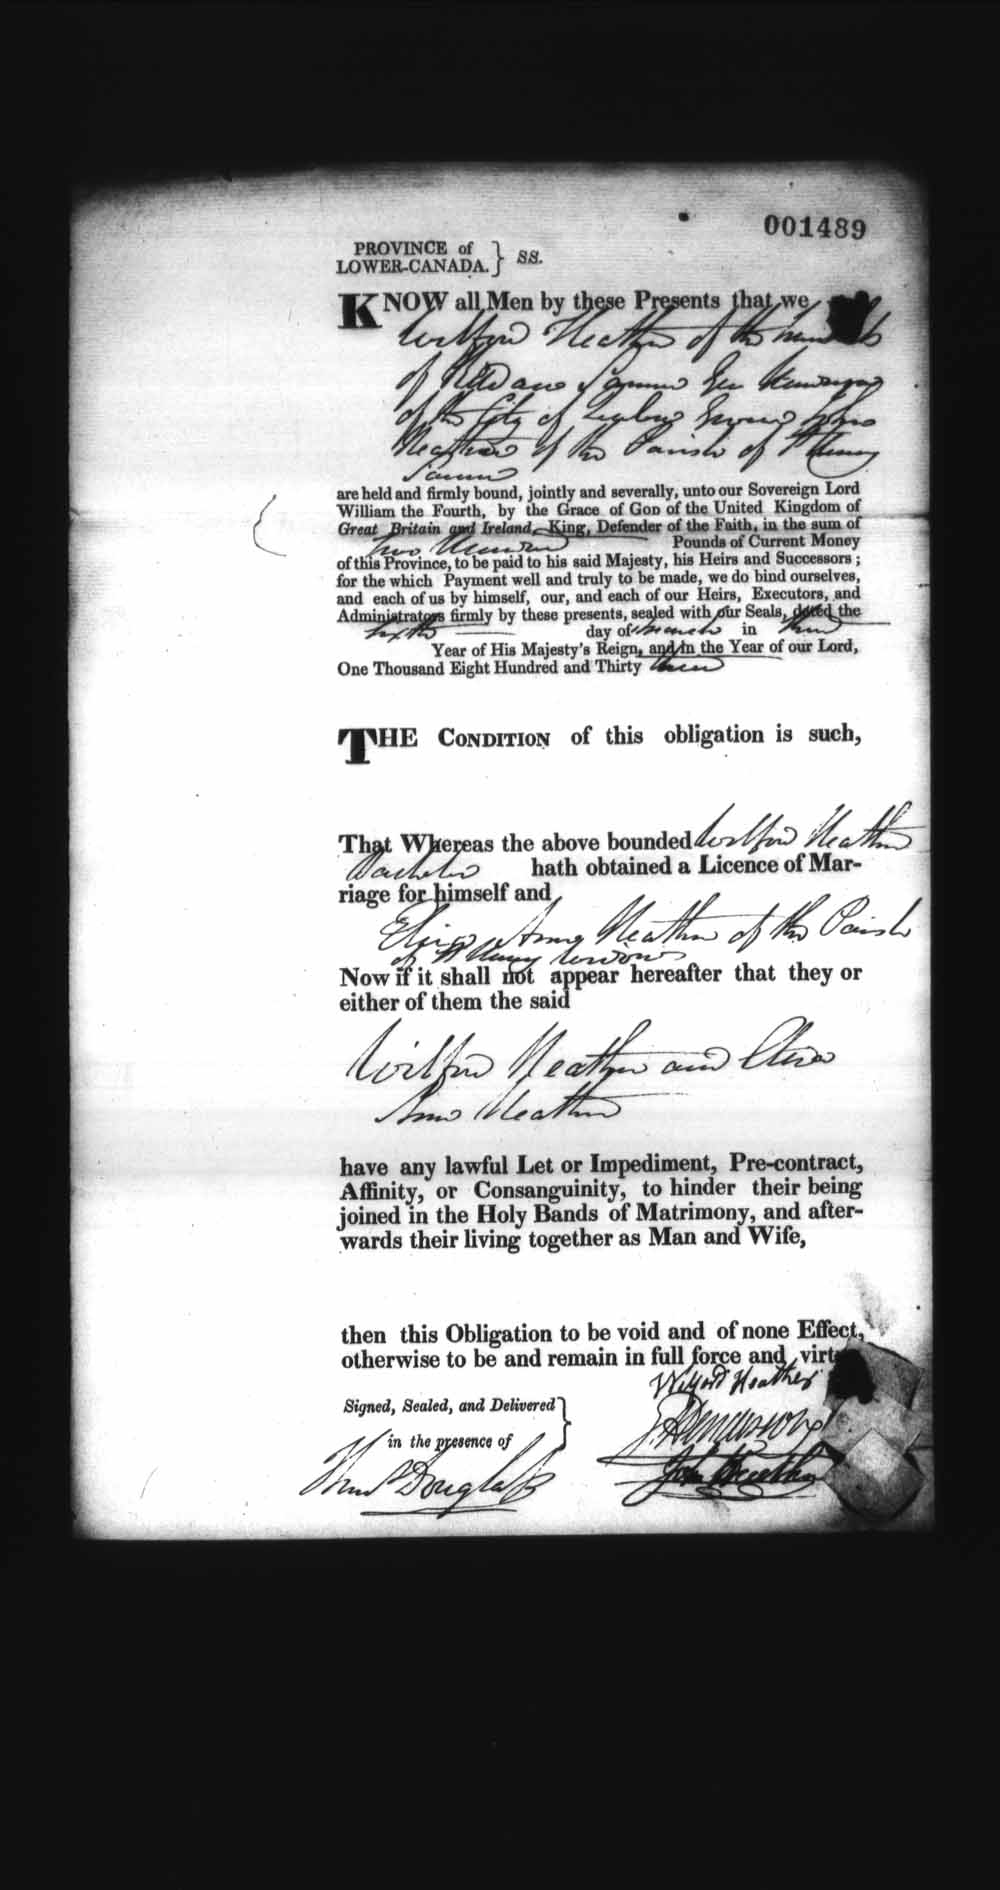 Digitized page of Upper and Lower Canada Marriage Bonds (1779-1865) for Image No.: e008237777